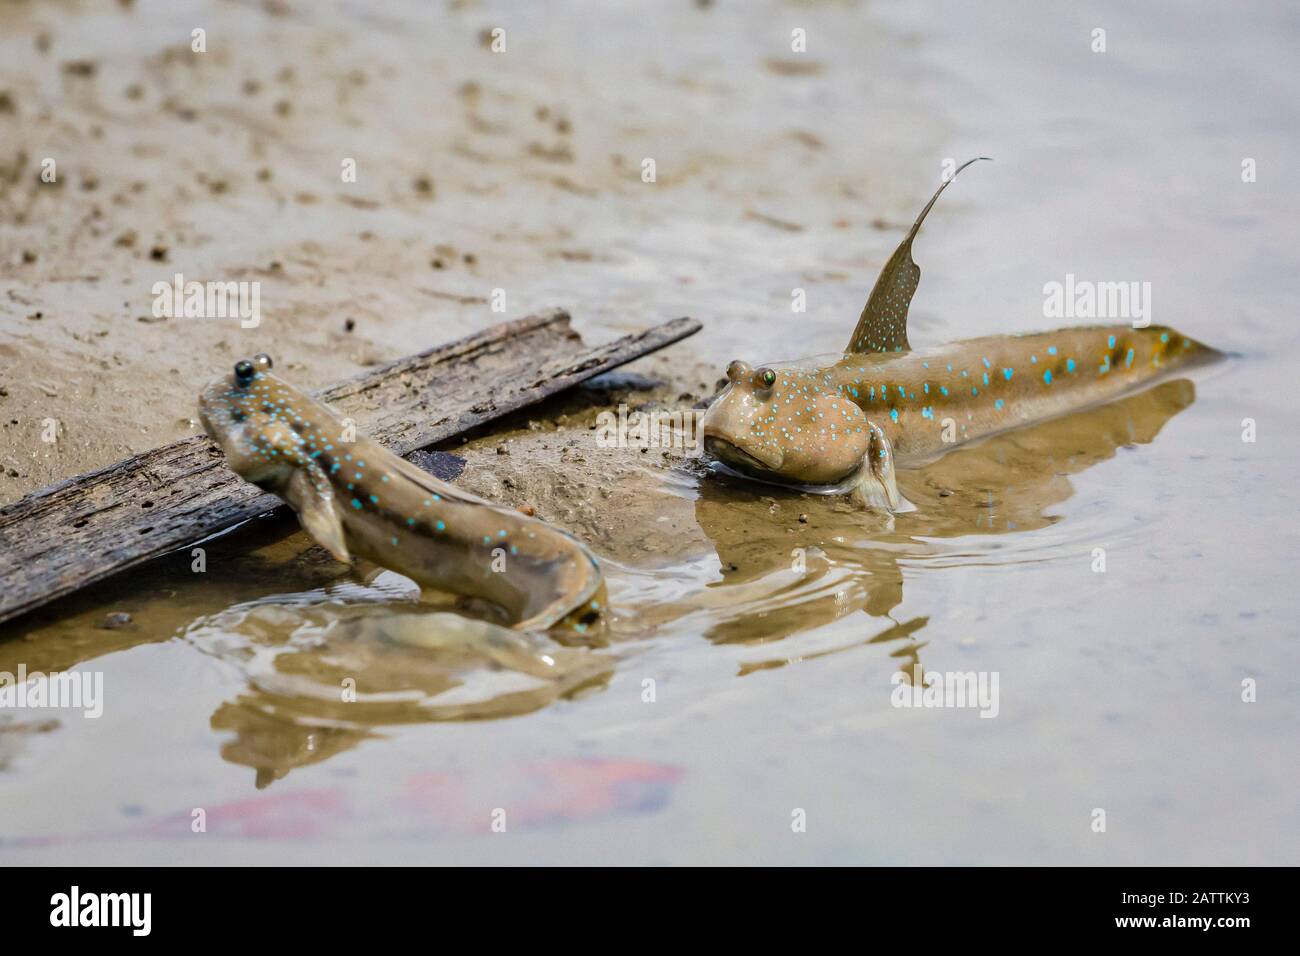 blue-spotted mudskipper, or Boddart's goggle-eyed goby, Boleophthalmus boddarti, adult, territorial display at low tide, Bako National Park, Kuching D Stock Photo